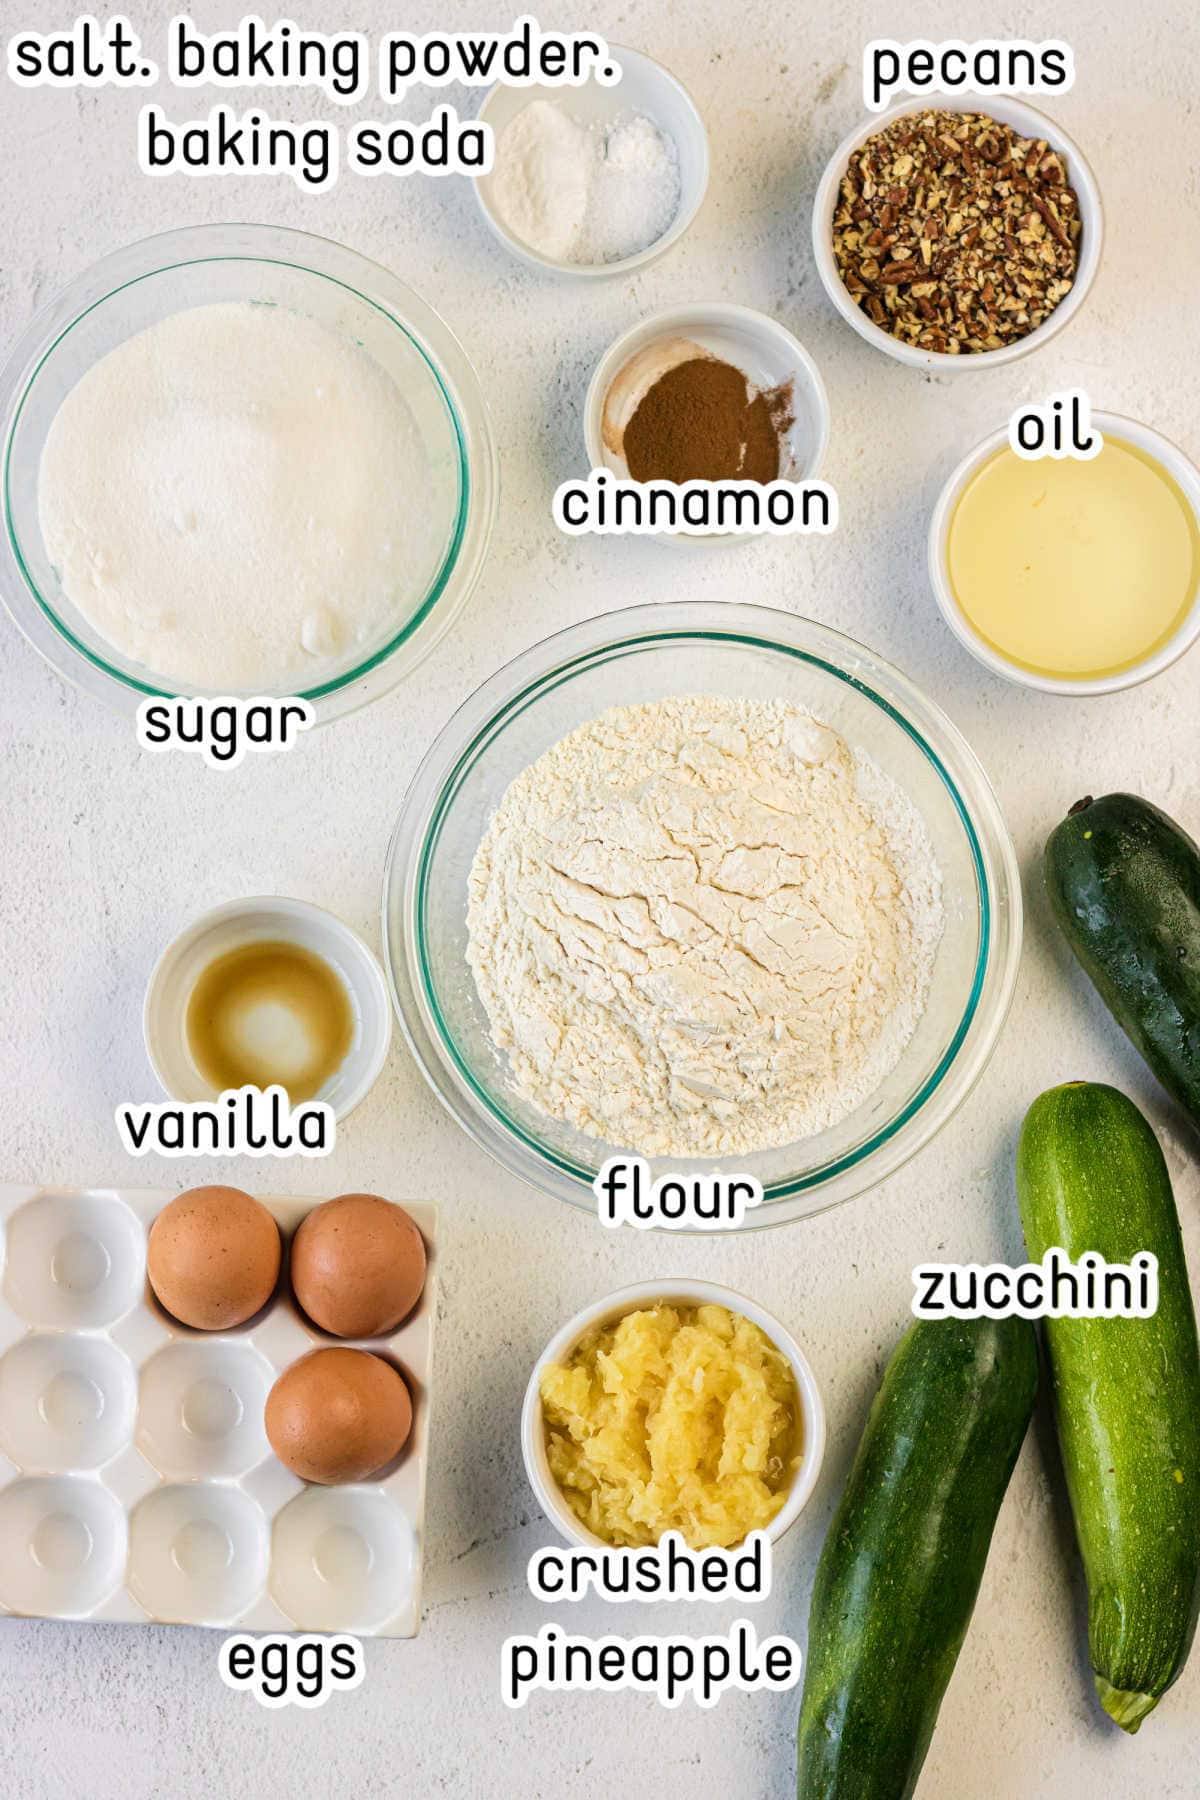 Labeled ingredients for zucchini bread.